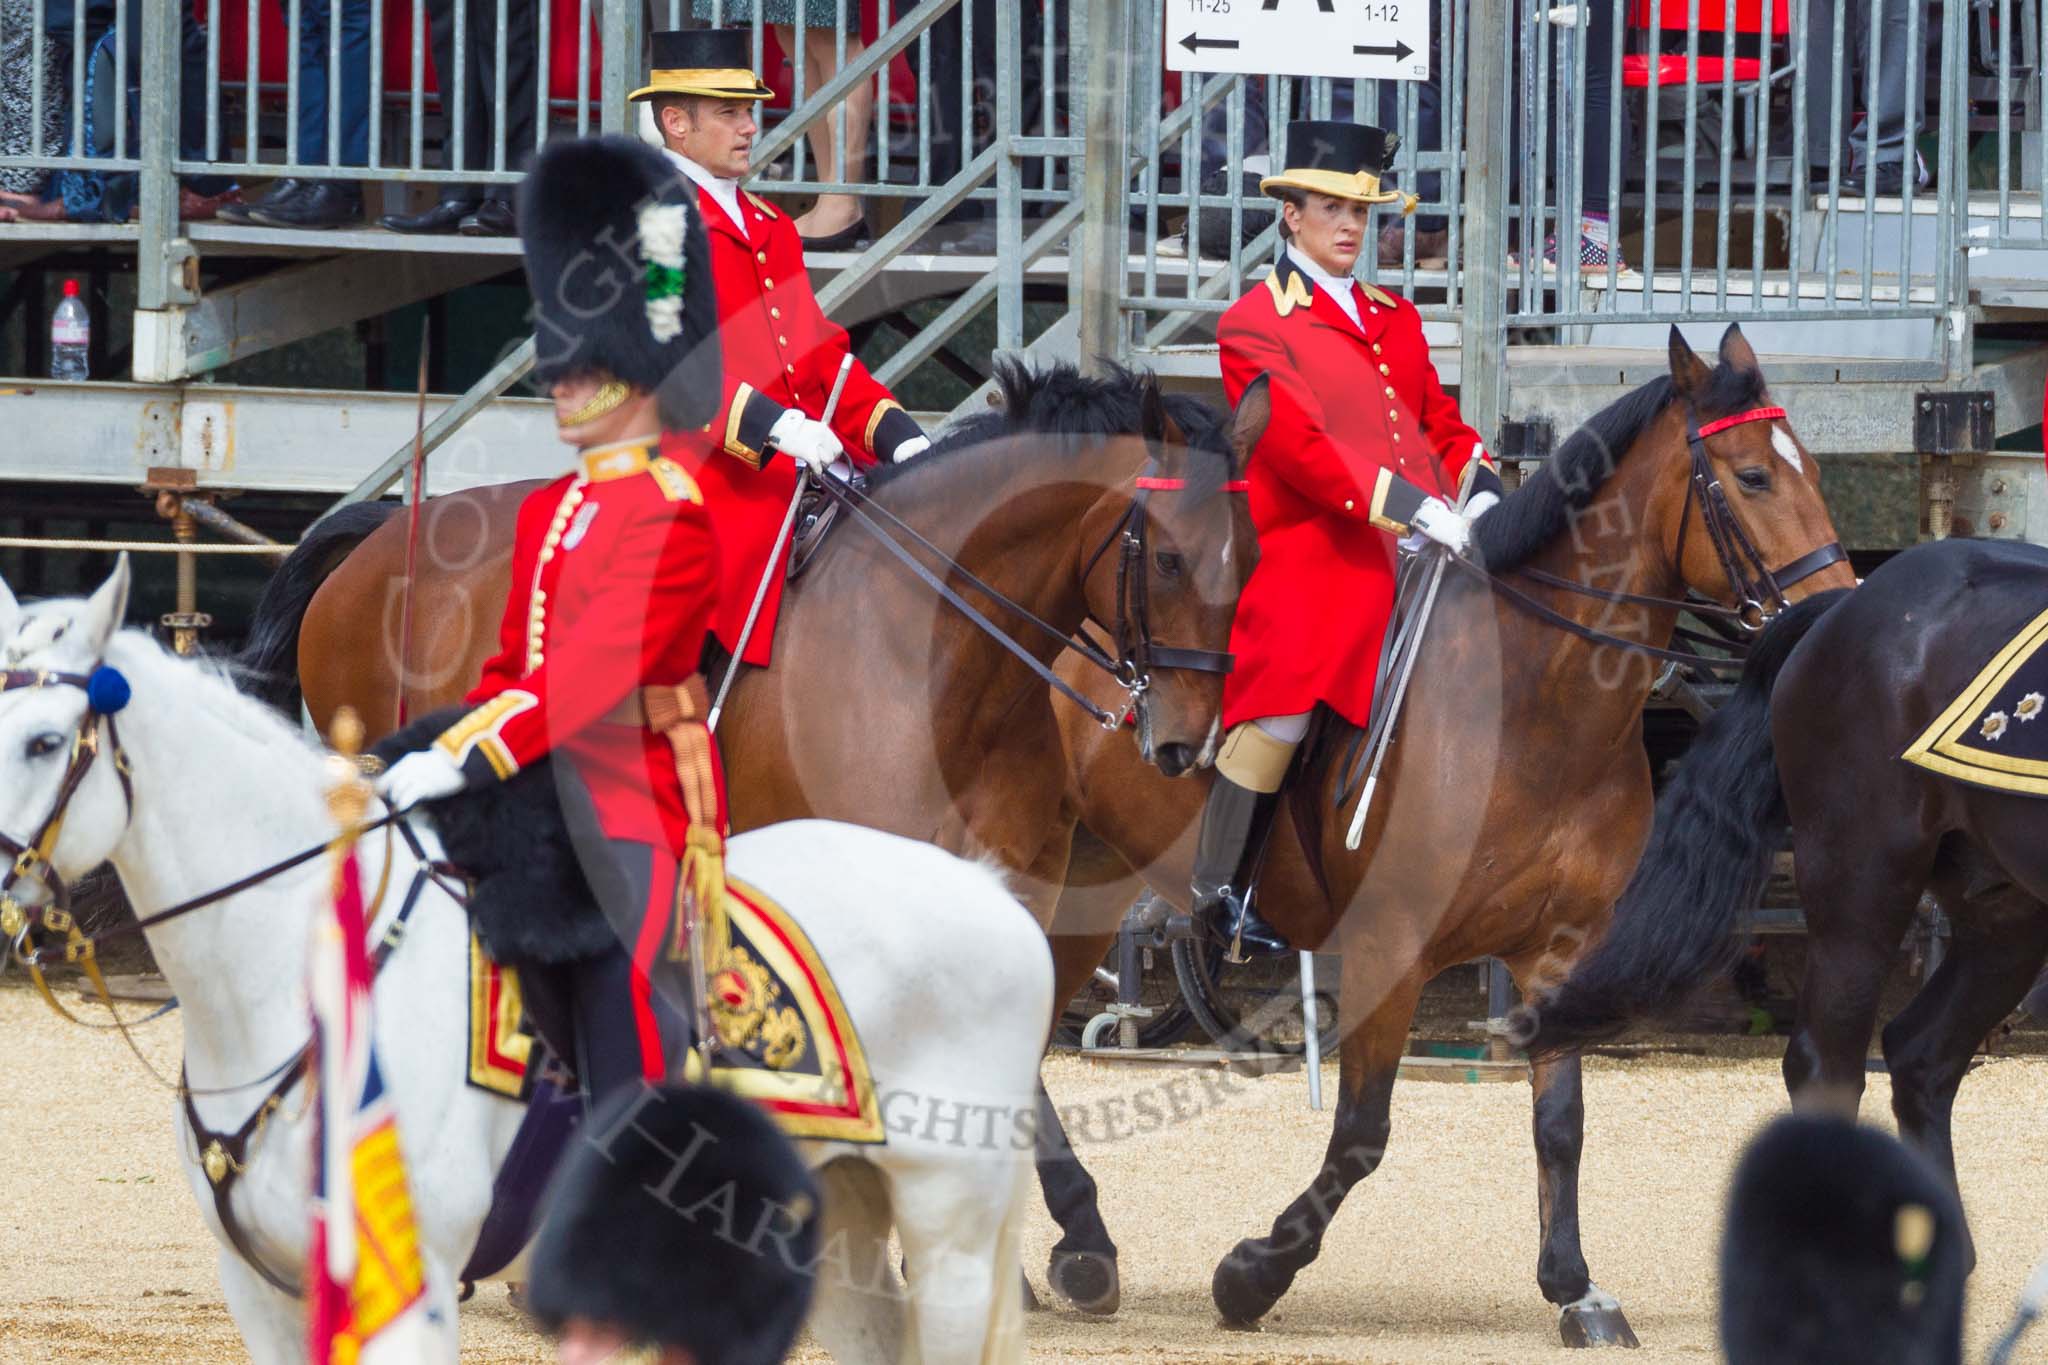 The Colonel's Review 2015.
Horse Guards Parade, Westminster,
London,

United Kingdom,
on 06 June 2015 at 10:59, image #185